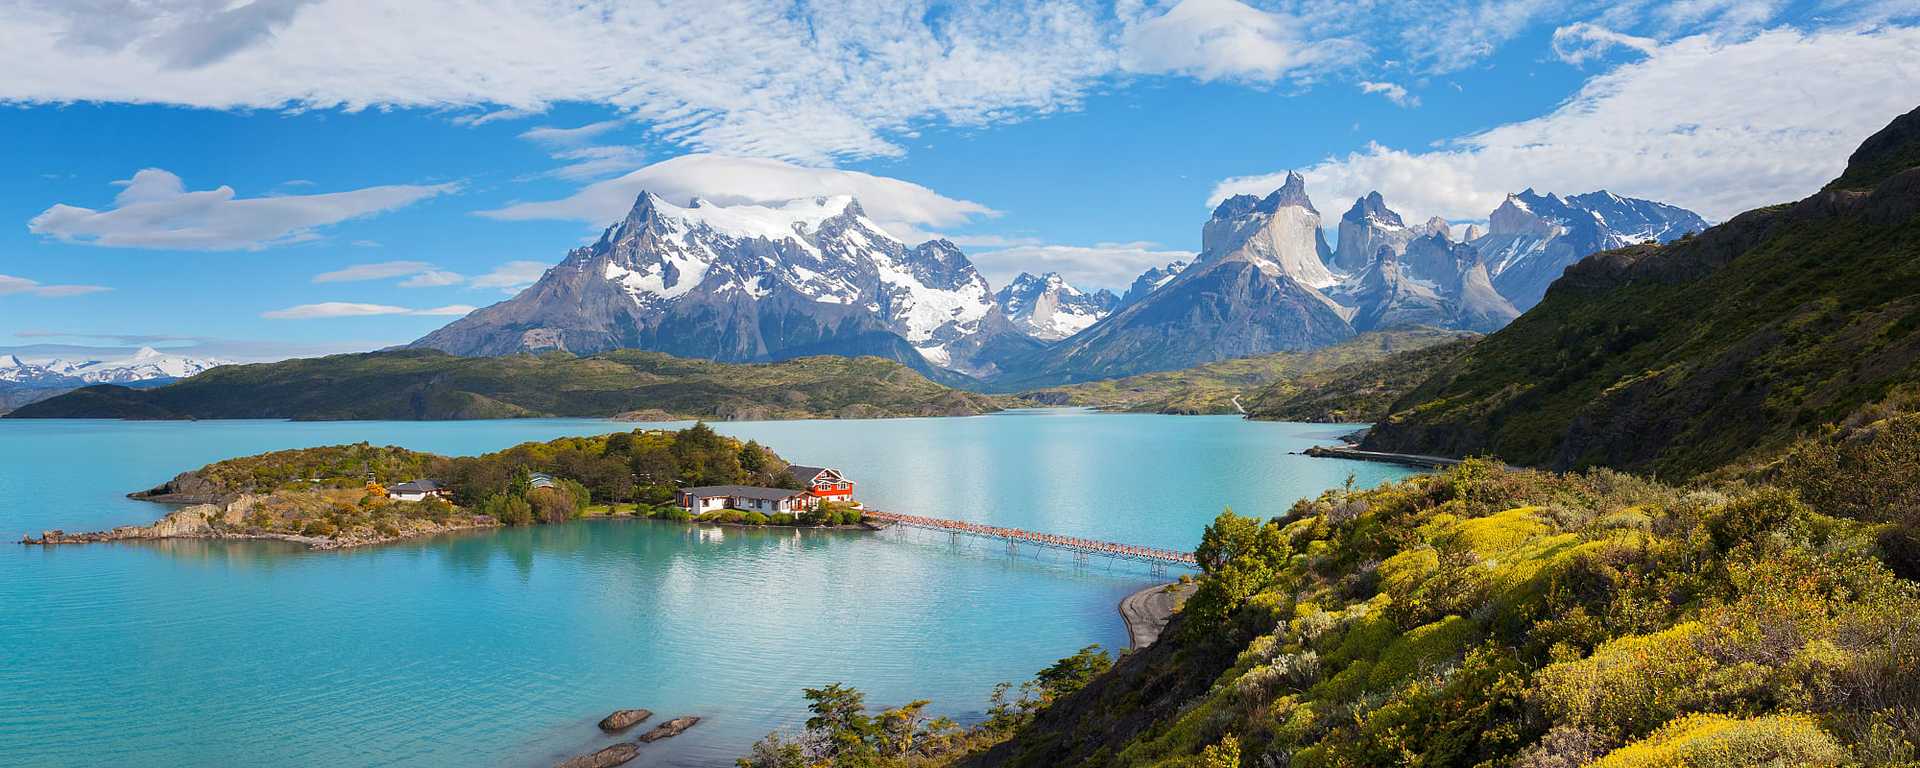 Lake Pehoe in Torres del Paine National Park, Chile